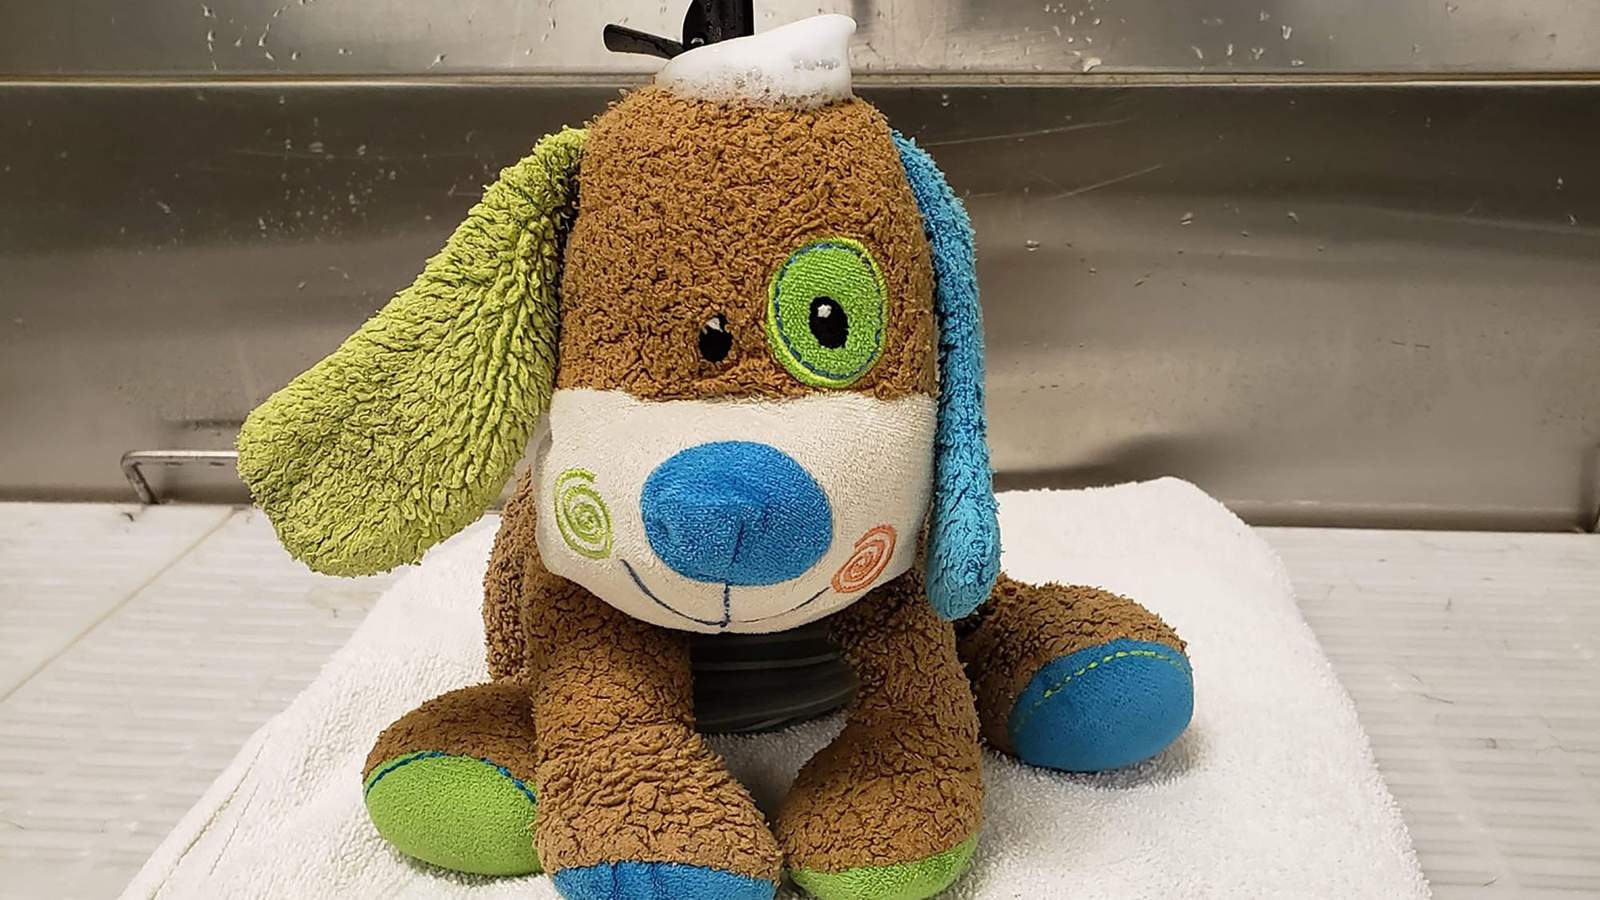 A boy lost his ‘stuffy-puppy’ near a dog spa in Maine, then groomers gave it a special spa day